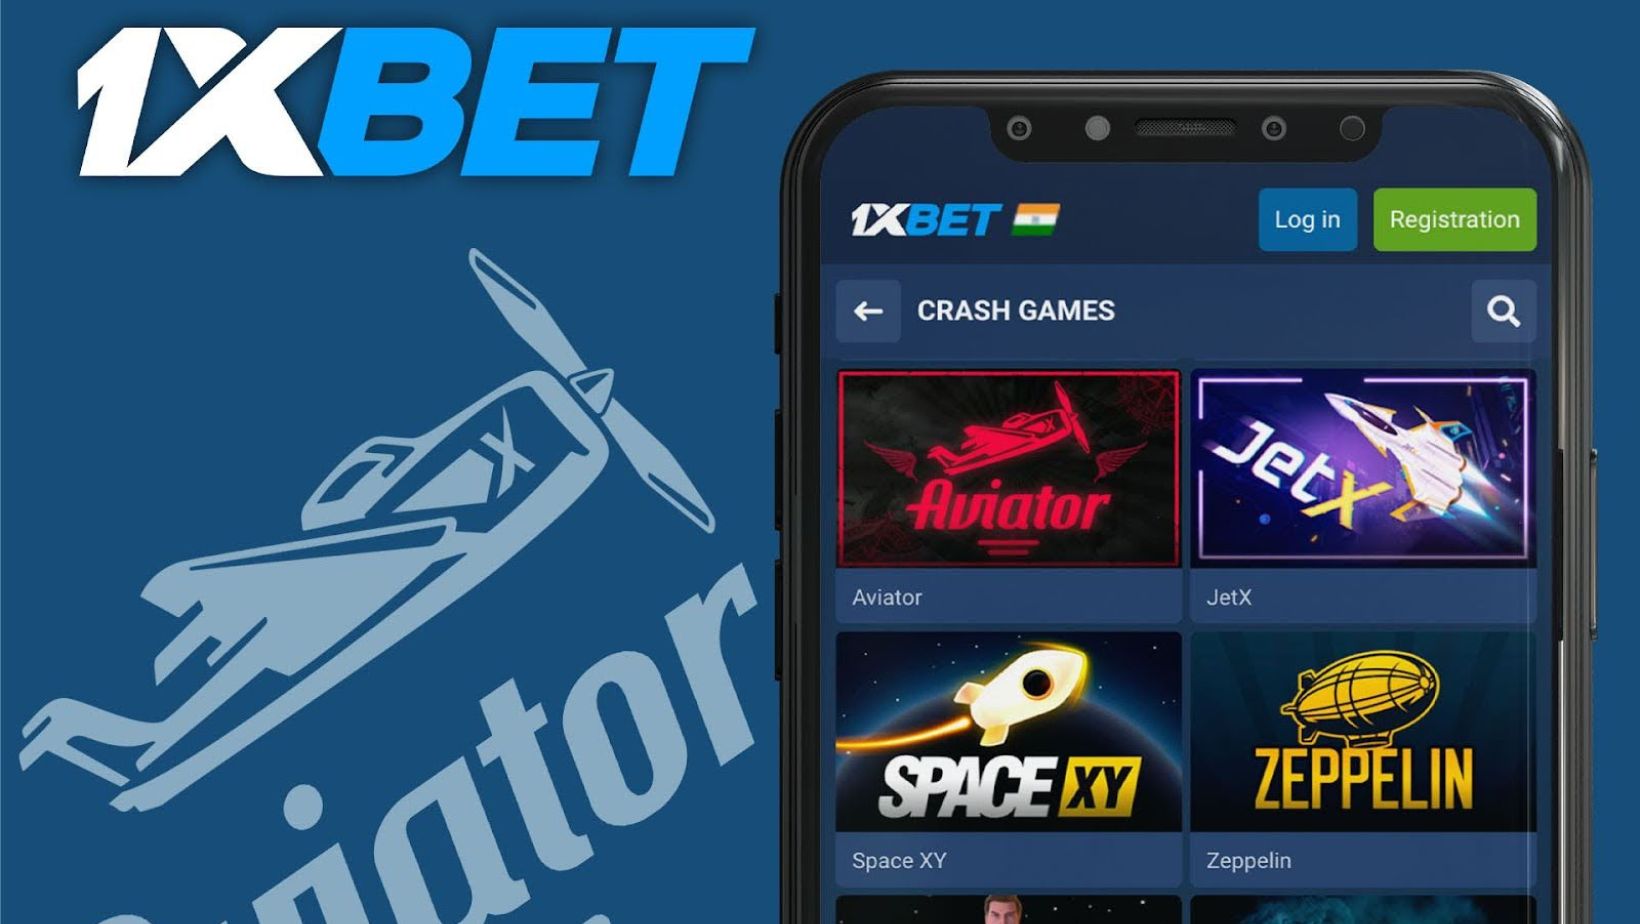 How to Find the Aviator Game in 1xBet Mobile App